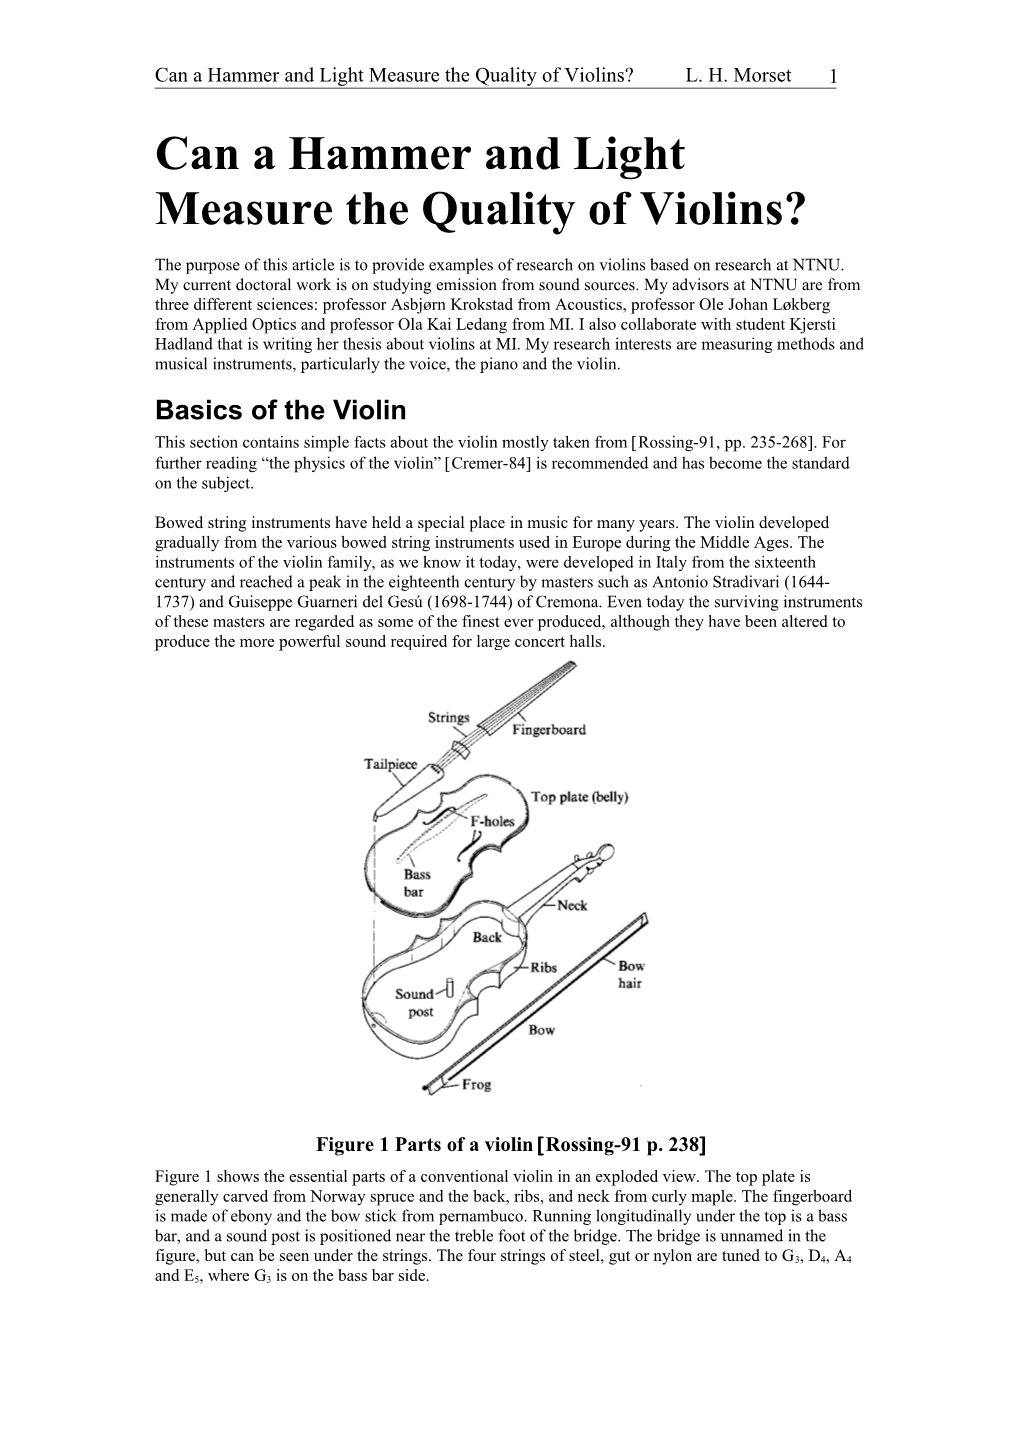 Can a Hammer and Light Measure the Quality of Violins